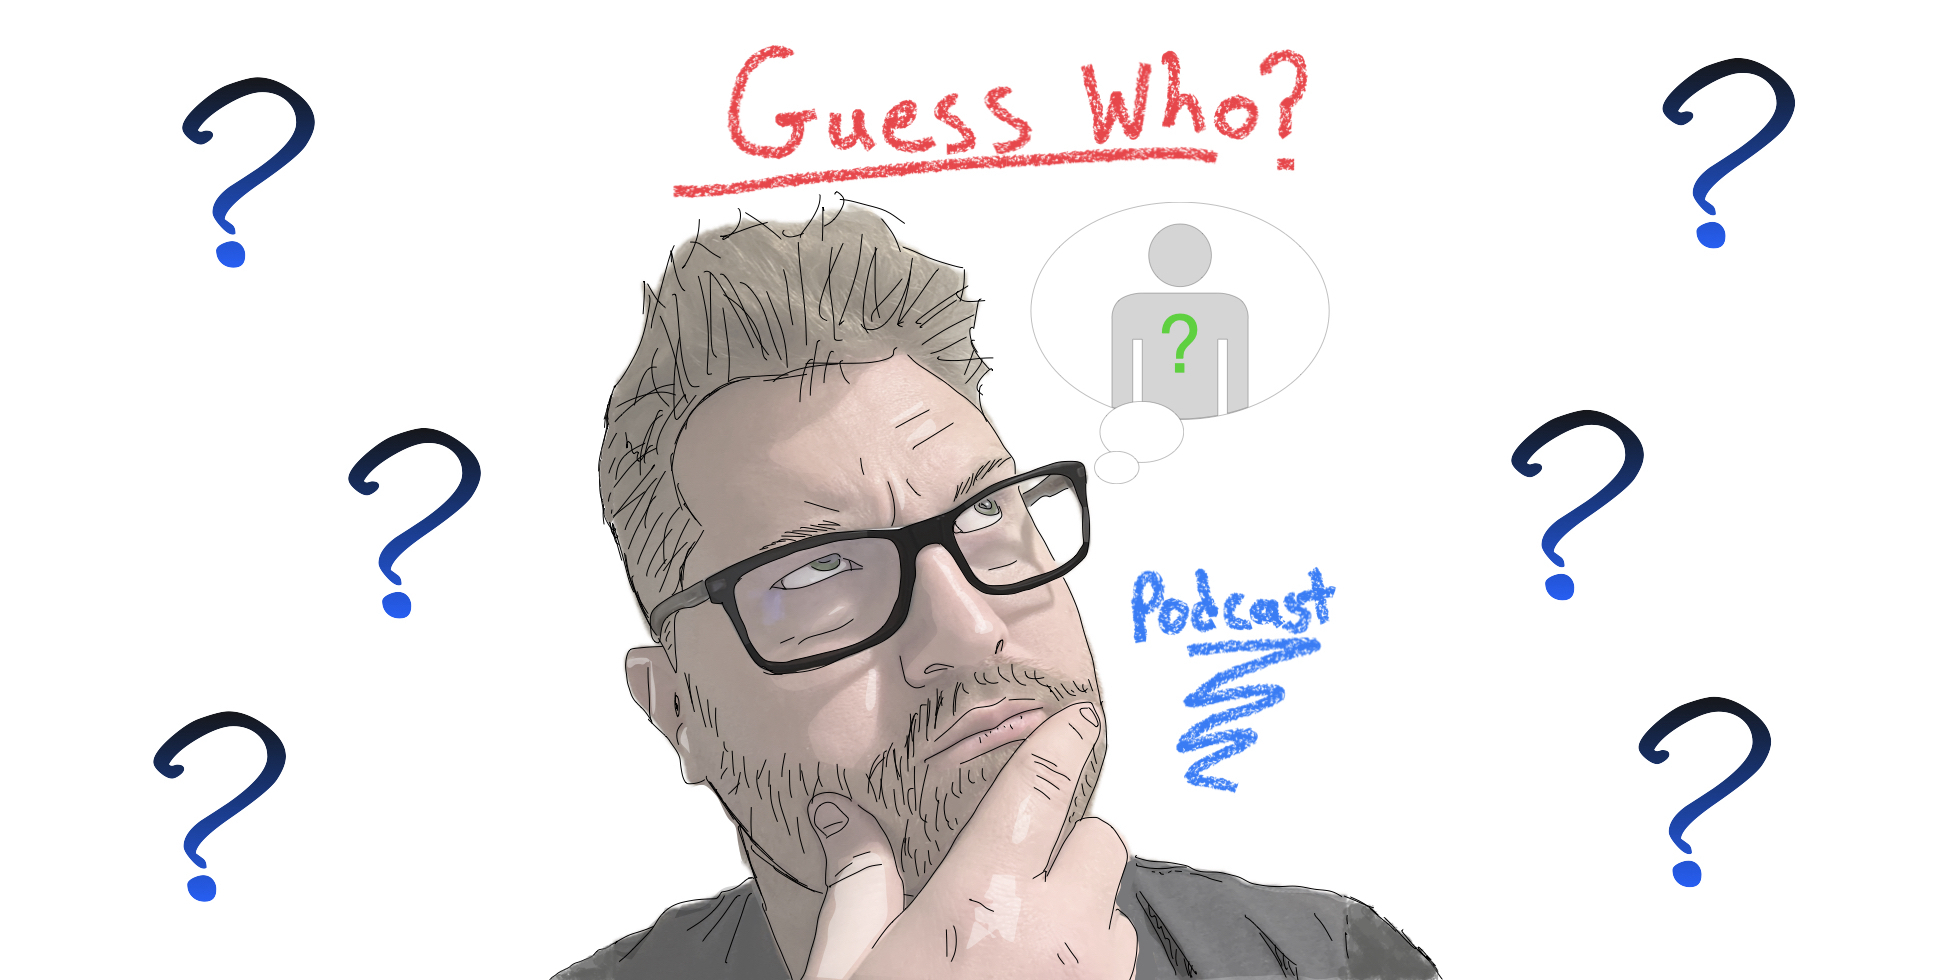 Image of a person looking up pensively with the words “Guess Who Podcast” and a thought bubble with an unknown figure inside.